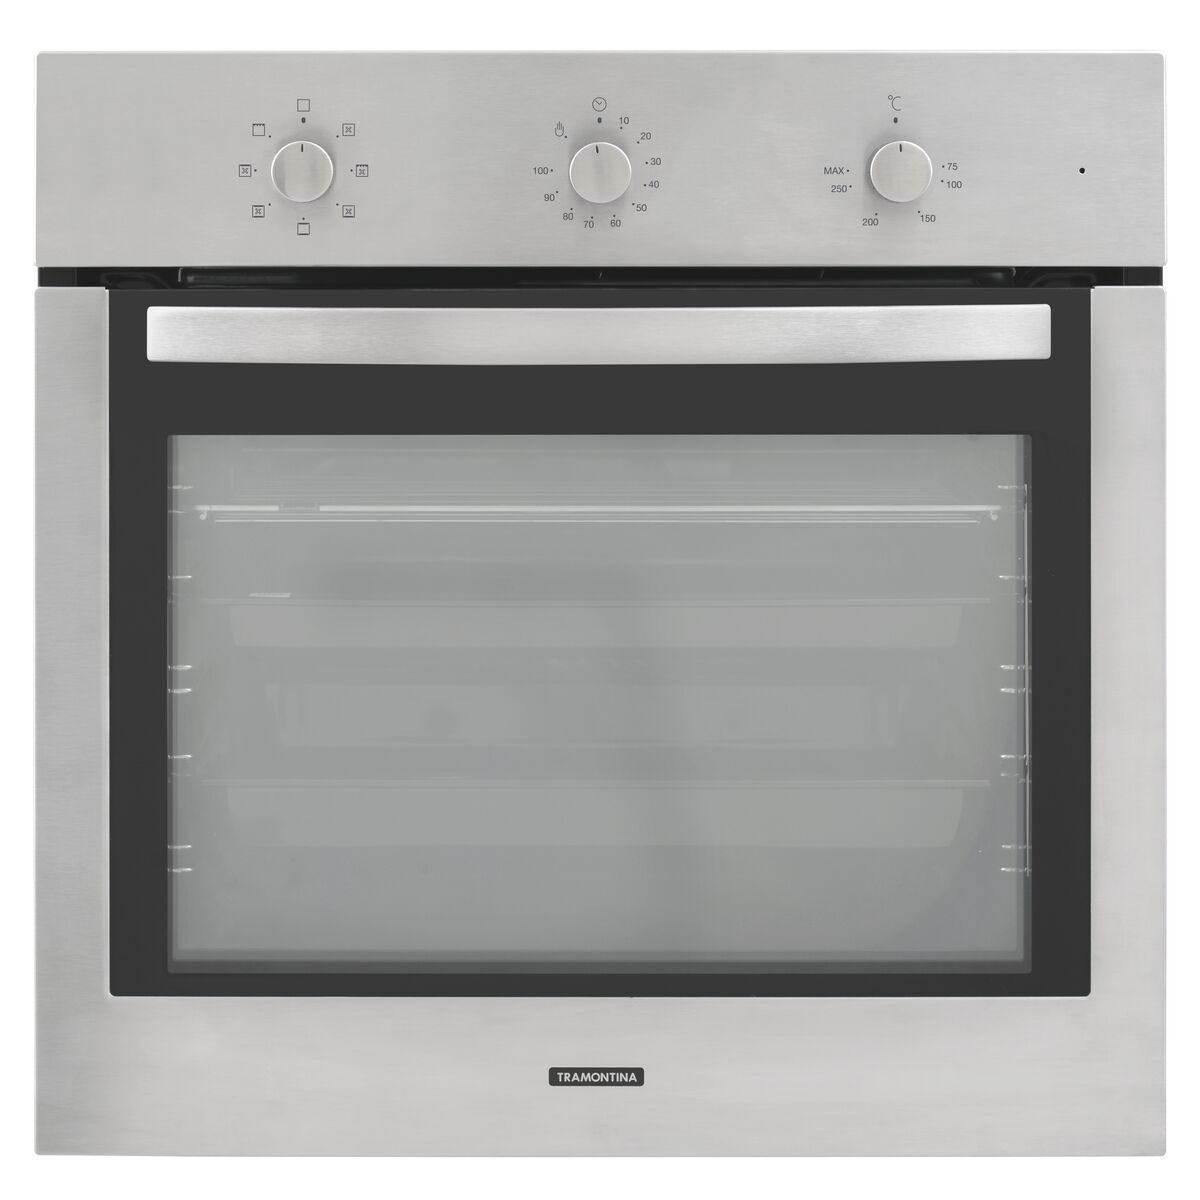 Tramontina 7 settings, 71L stainless steel built-in electric oven